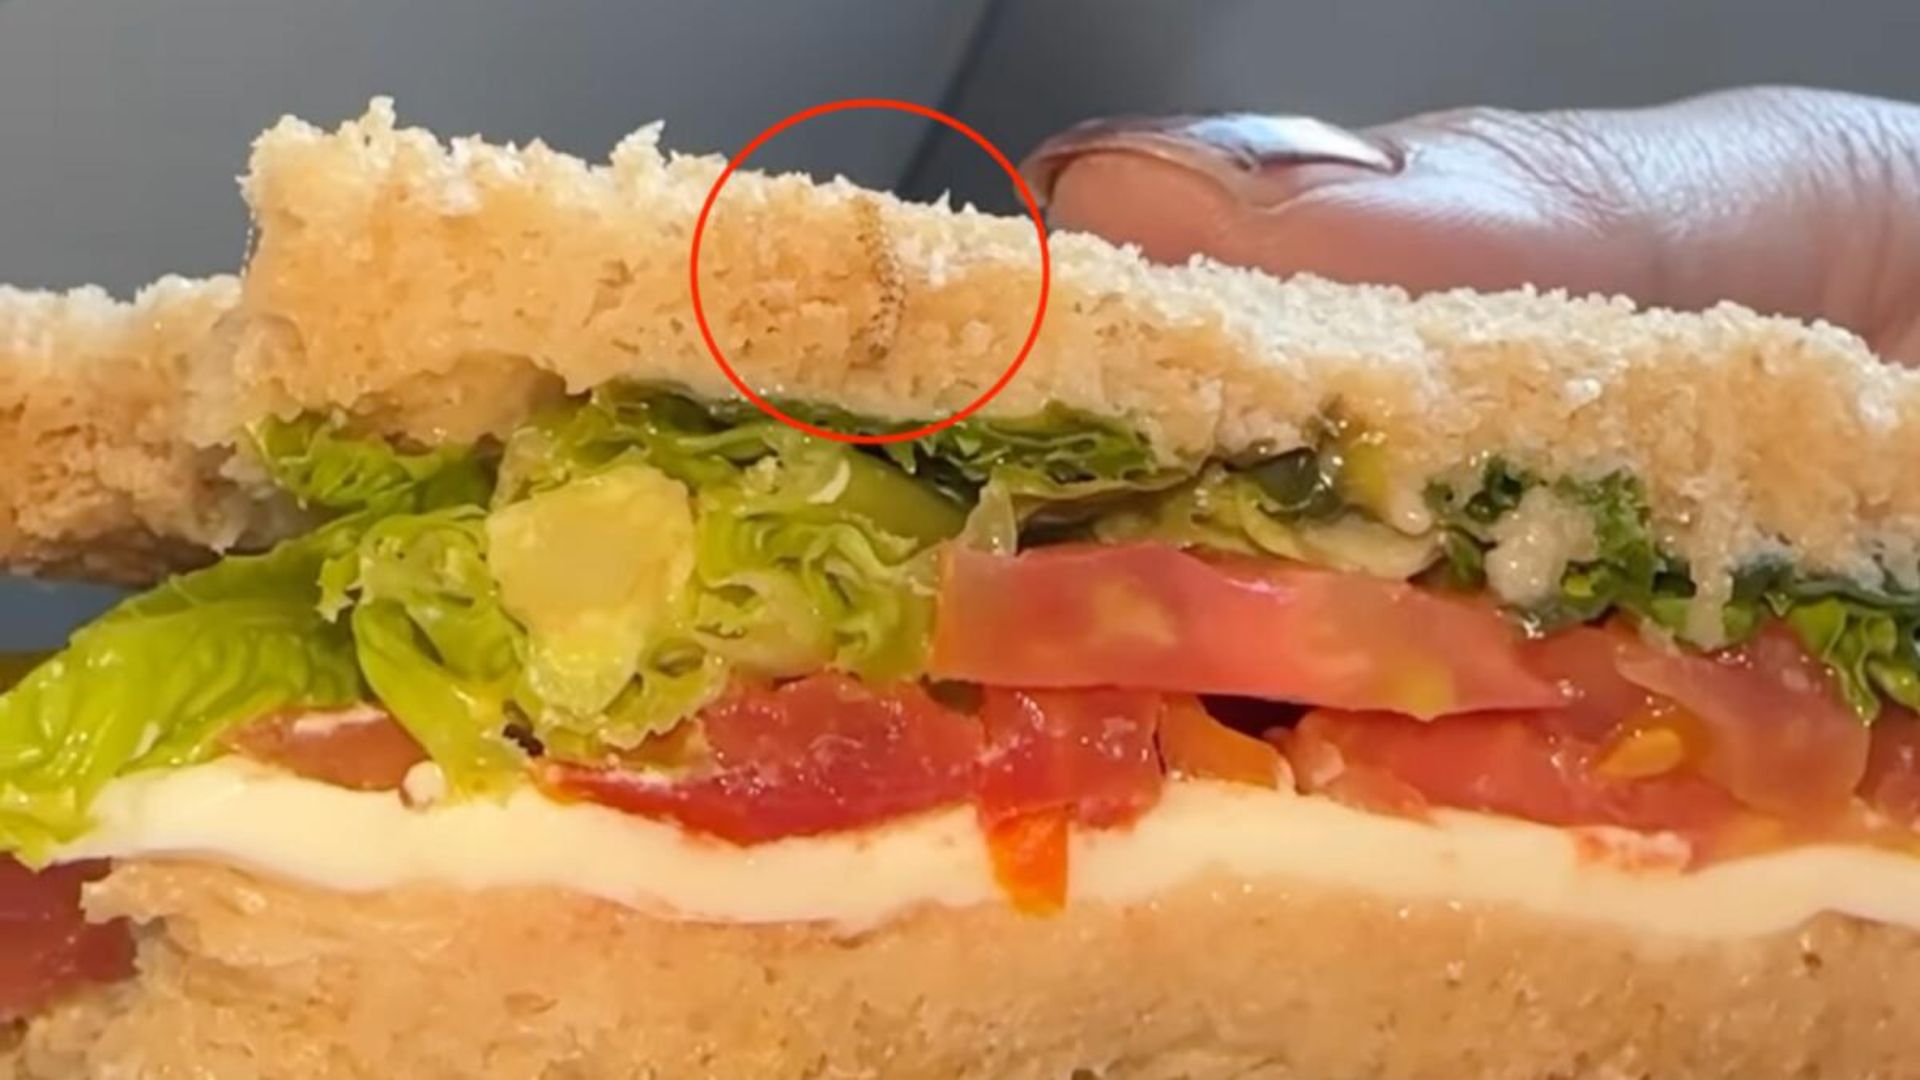 IndiGo issues apology to passenger: Worm in Sandwich